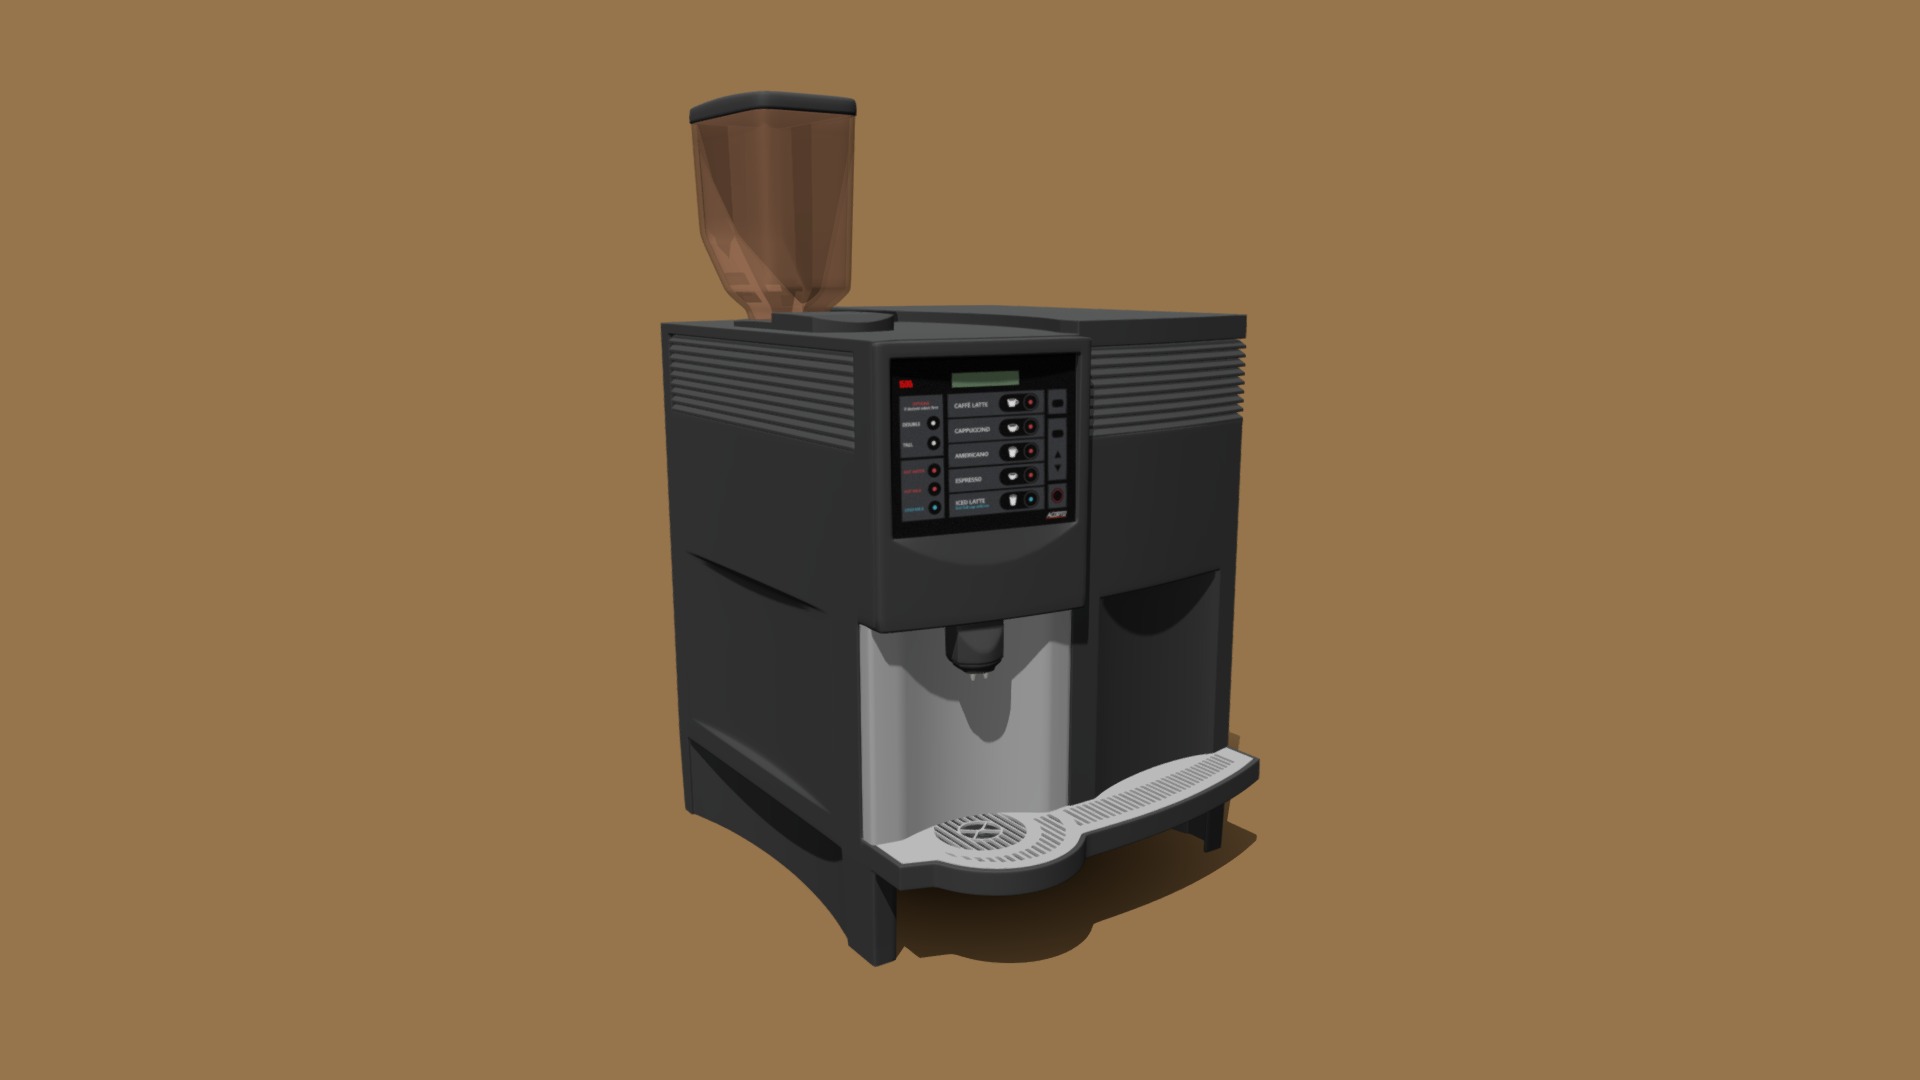 3D model Coffee Maker Acorto 1500i - This is a 3D model of the Coffee Maker Acorto 1500i. The 3D model is about a small computer tower.